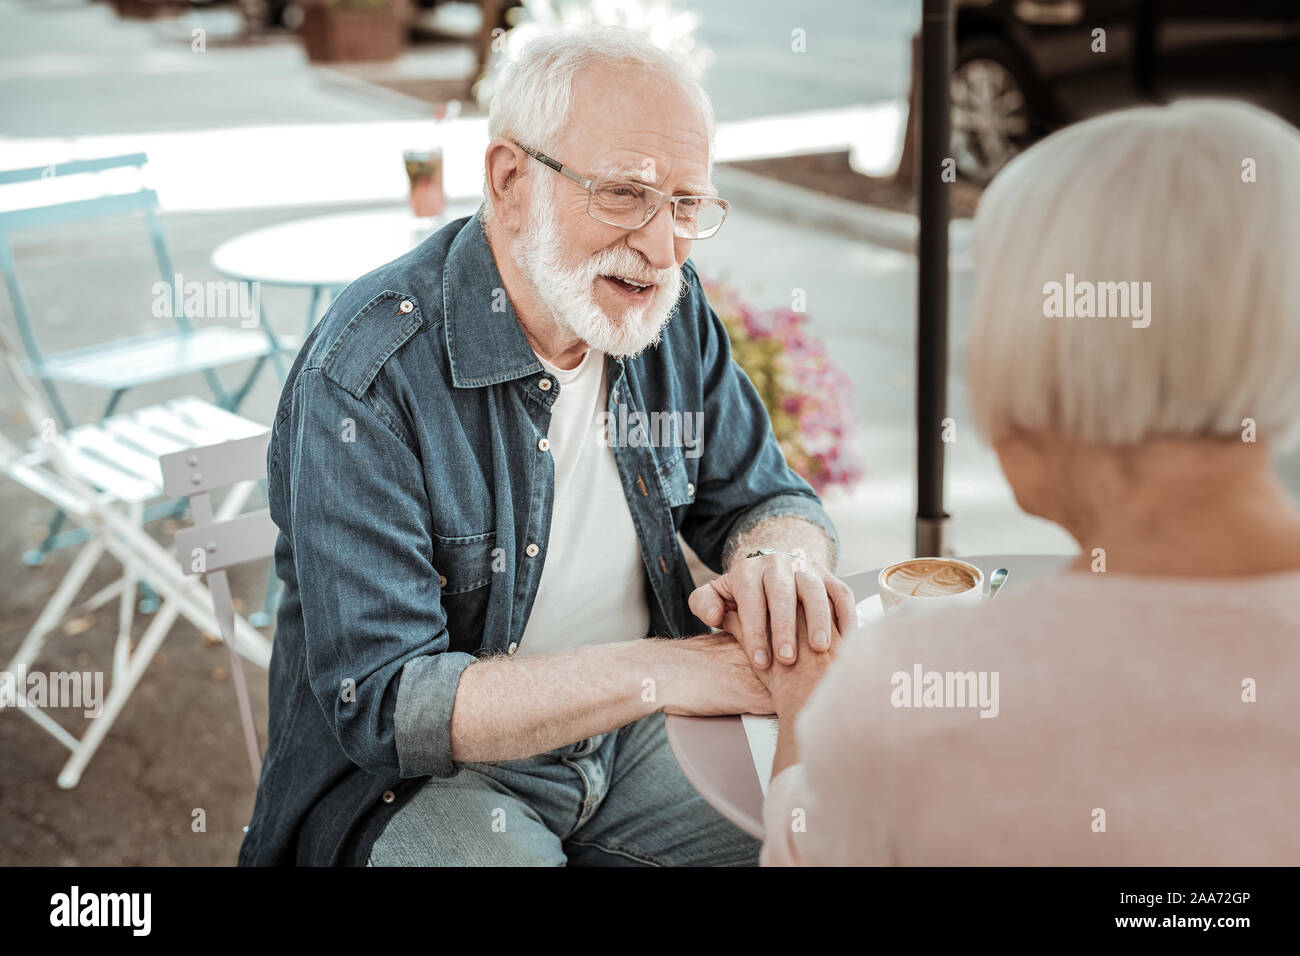 Nice aged man looking at his beloved wife Stock Photo